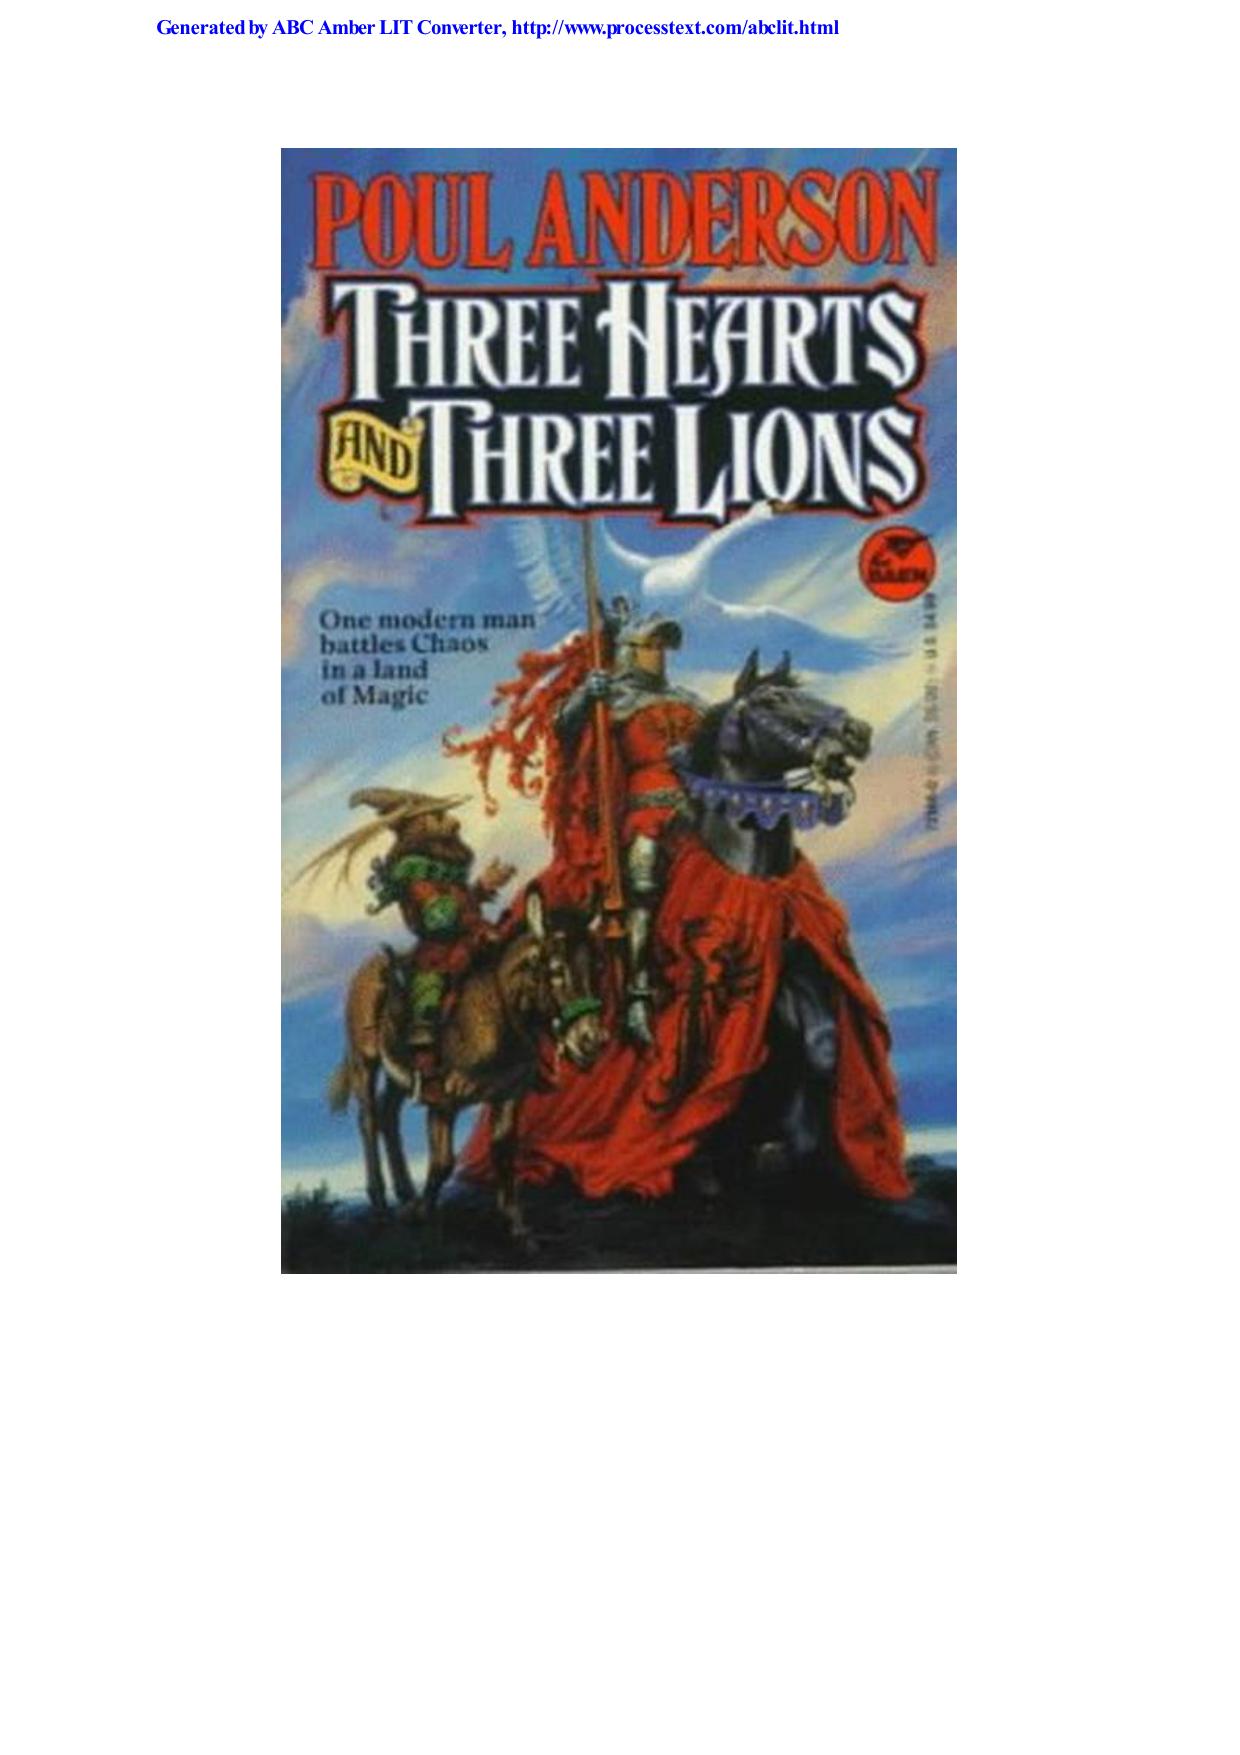 poul anderson three hearts and three lions